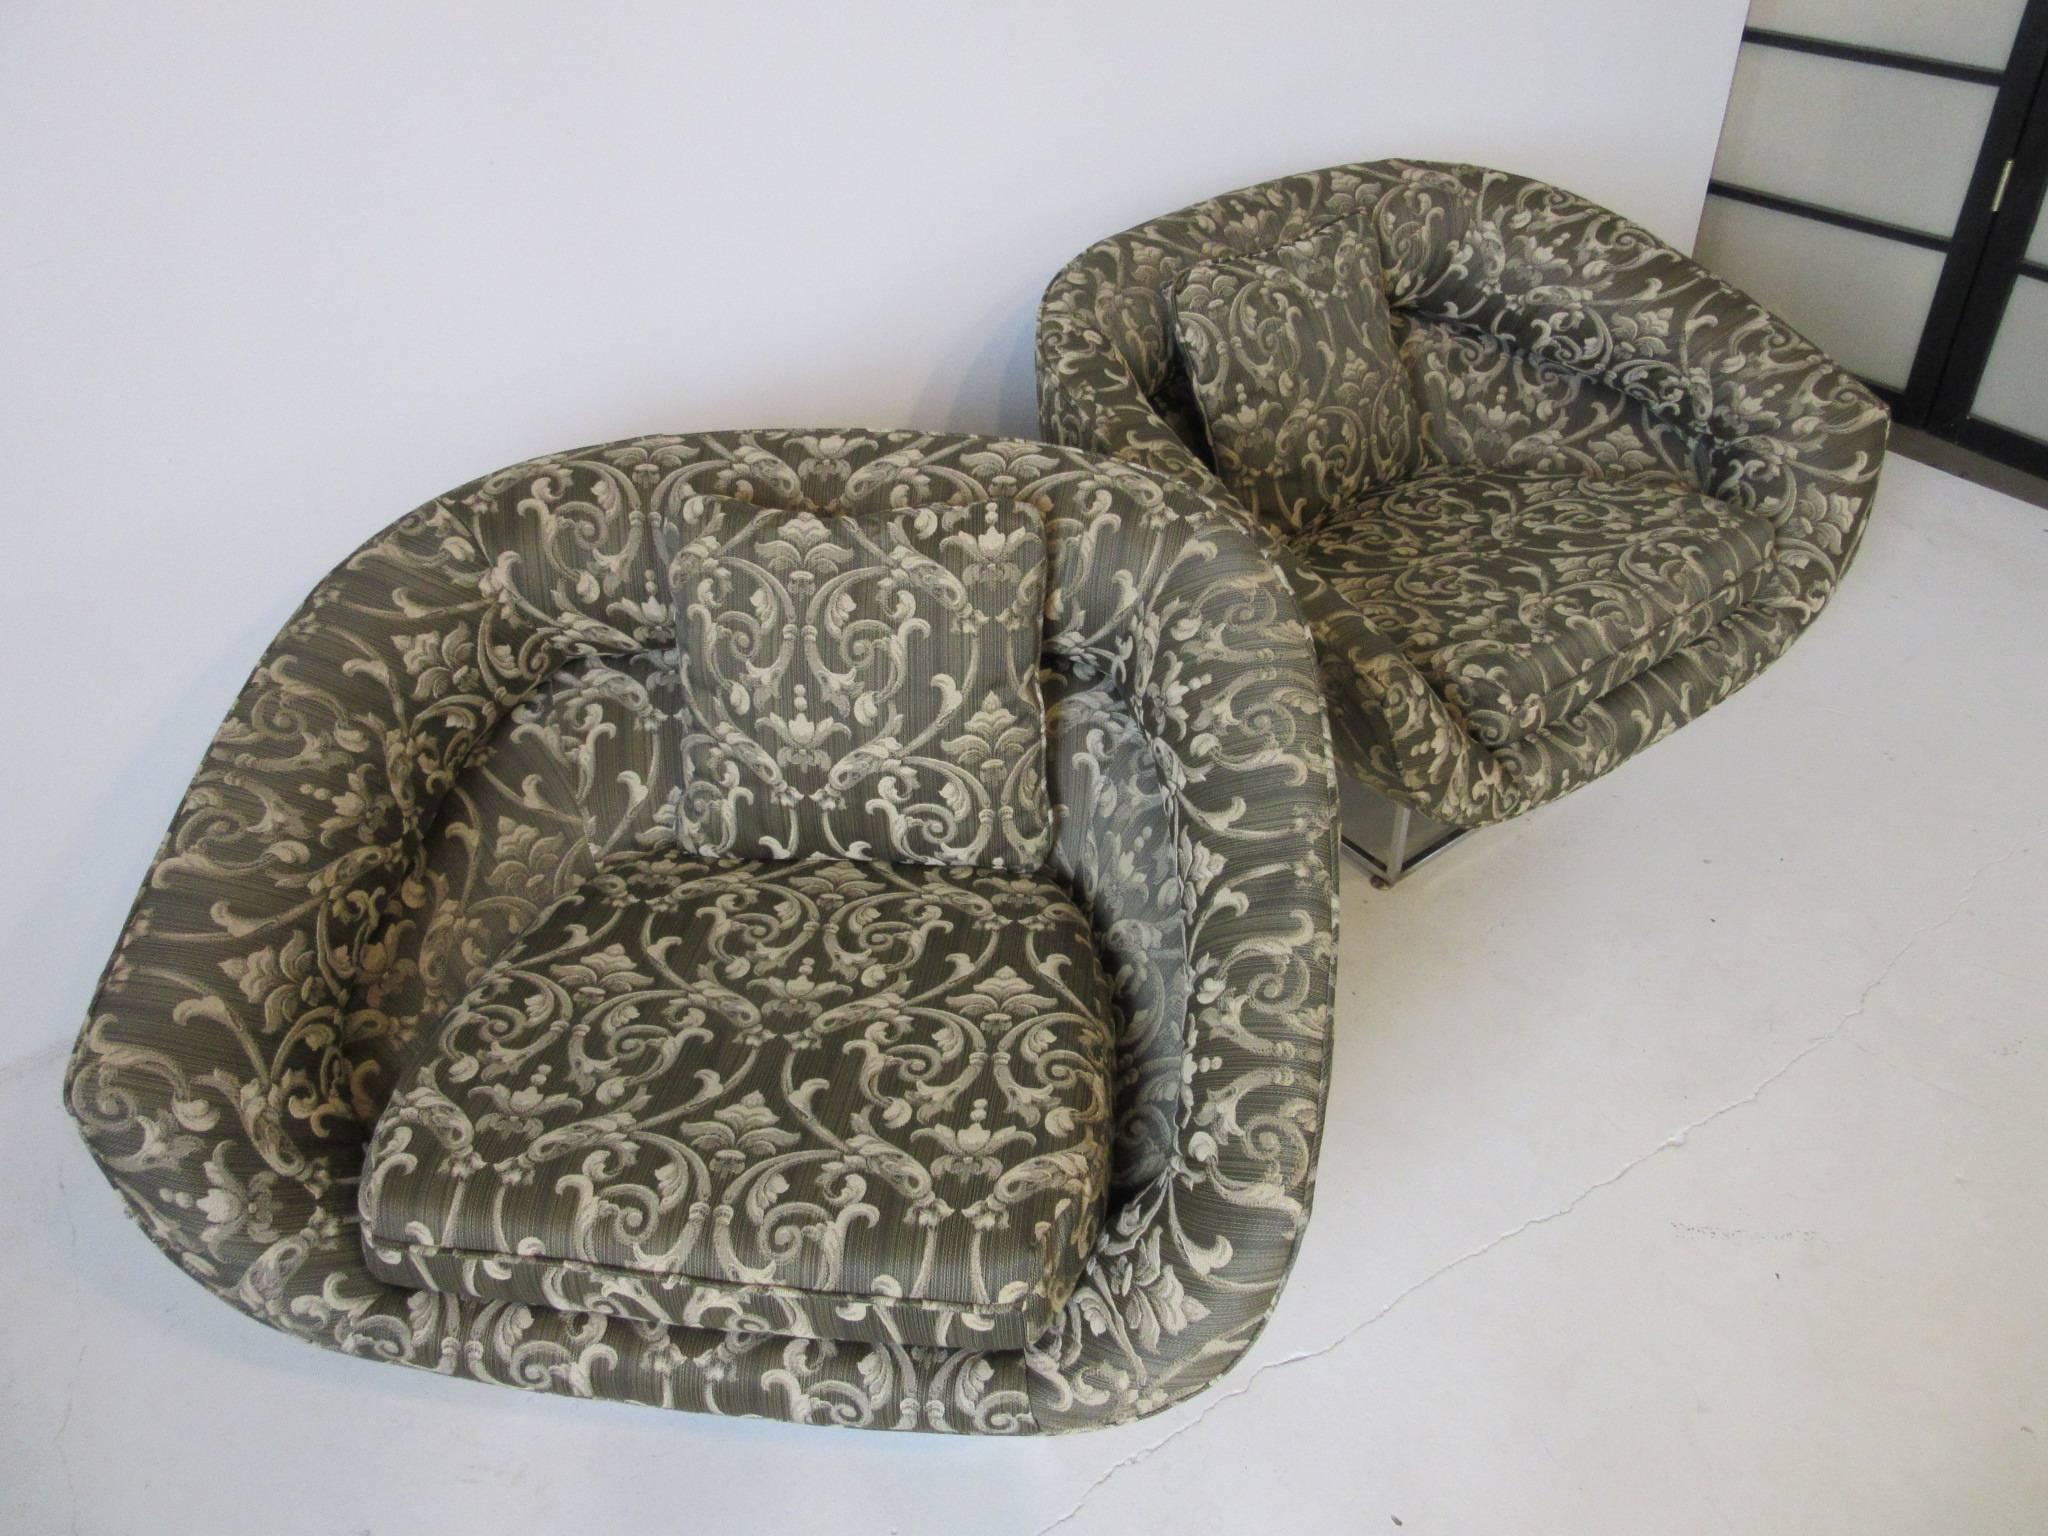 A pair of Milo Baughman barrel or tub styled lounge chairs with square chrome tubed base, loose back and bottom cushions and reupholstered in a barque patterned fabric. The perfect matched look for a modern design and a rich opulent feel,